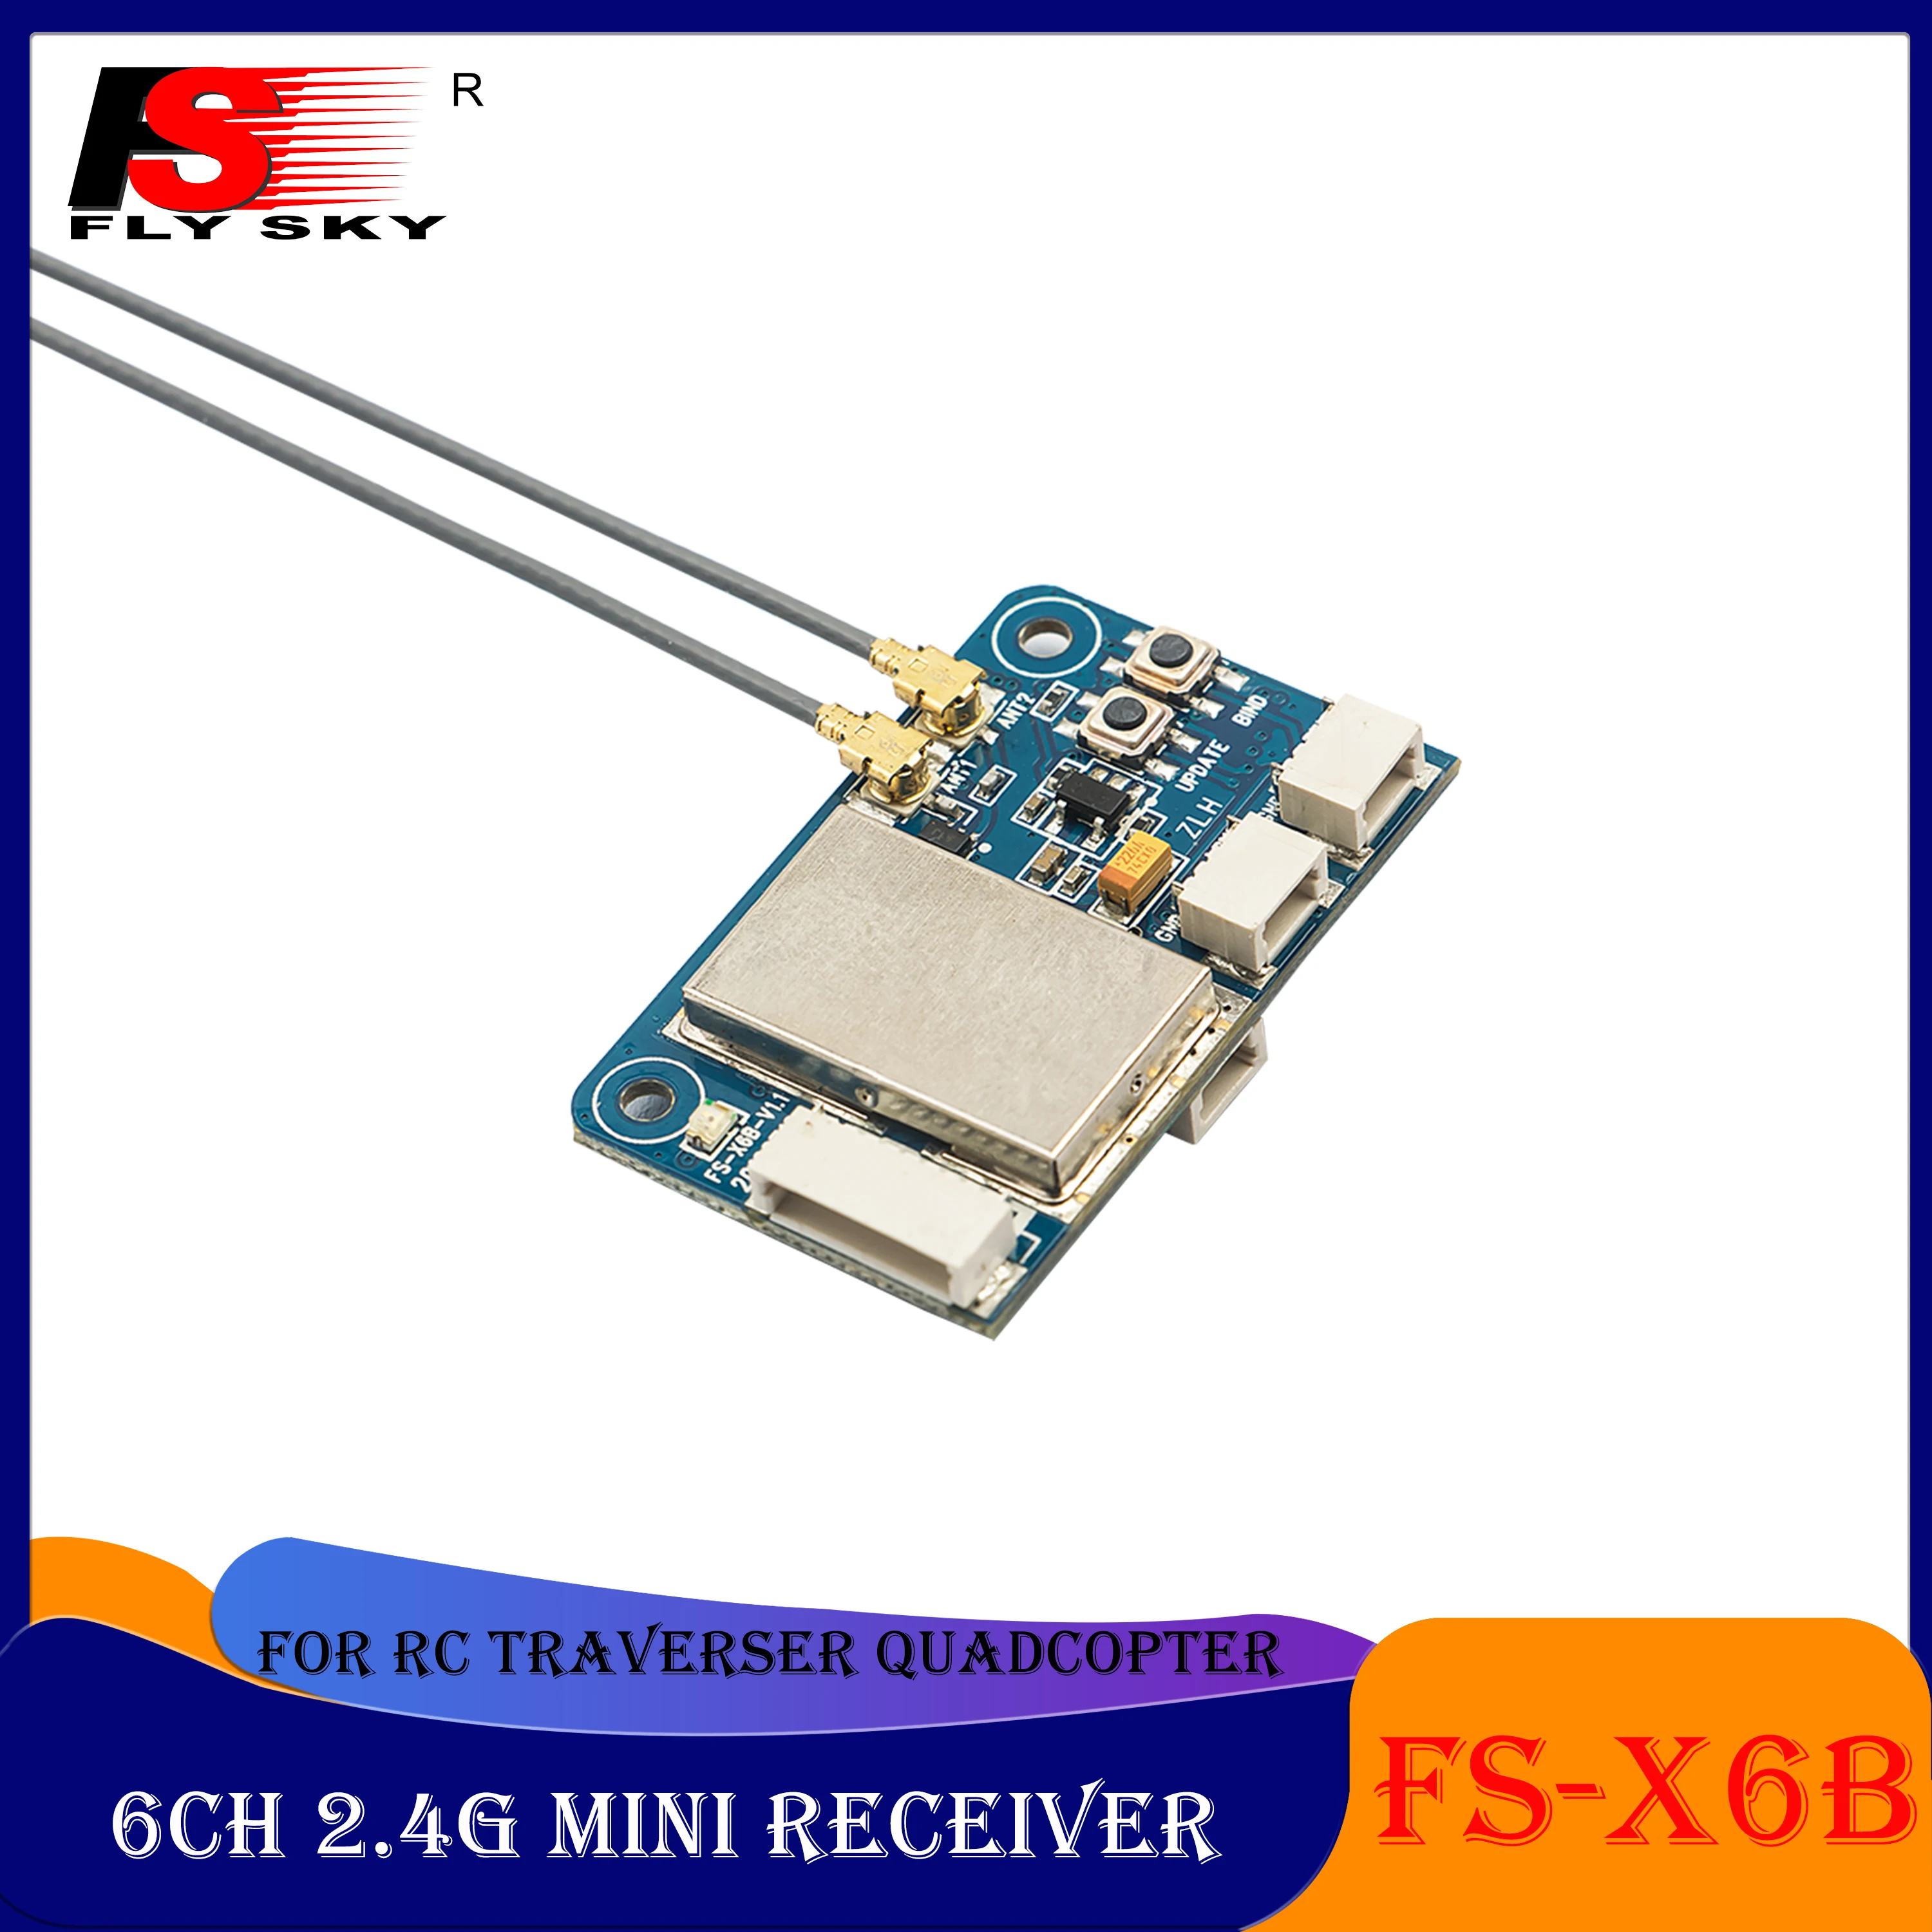 FLYSKY FS-X6B Mini Receiver 6 Channel 2.4G 4.0-8.4V Dual Antenna for RC Traverser Multi-rotor Aircraft Transmitter Accessories